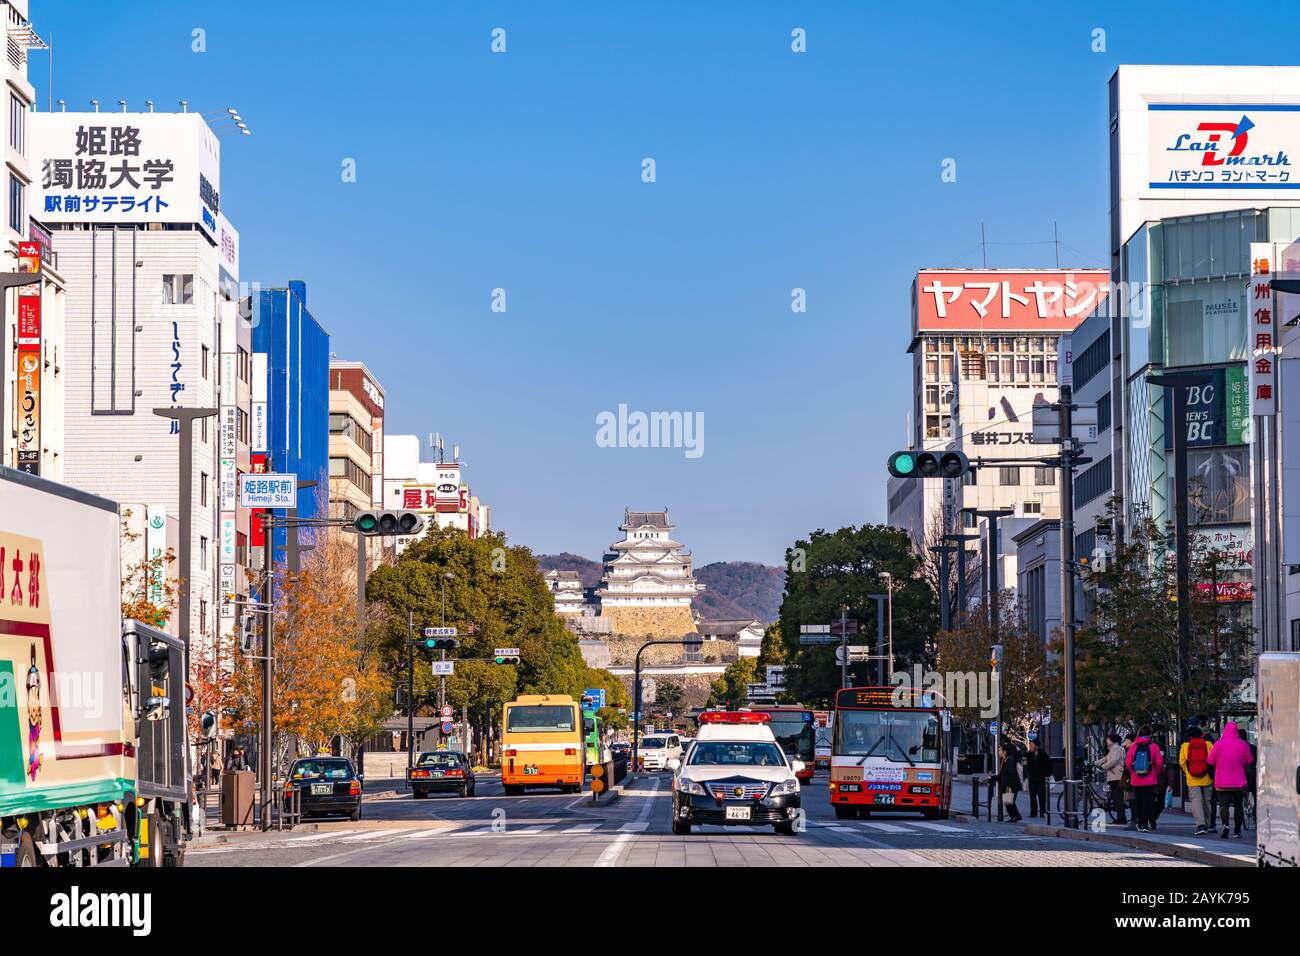 Cityscape of Himeji in sunny day with clear blue sky. popular sightseeing spot in Kansai region. Himeji, Hyogo Prefecture, Japan Stock Photo